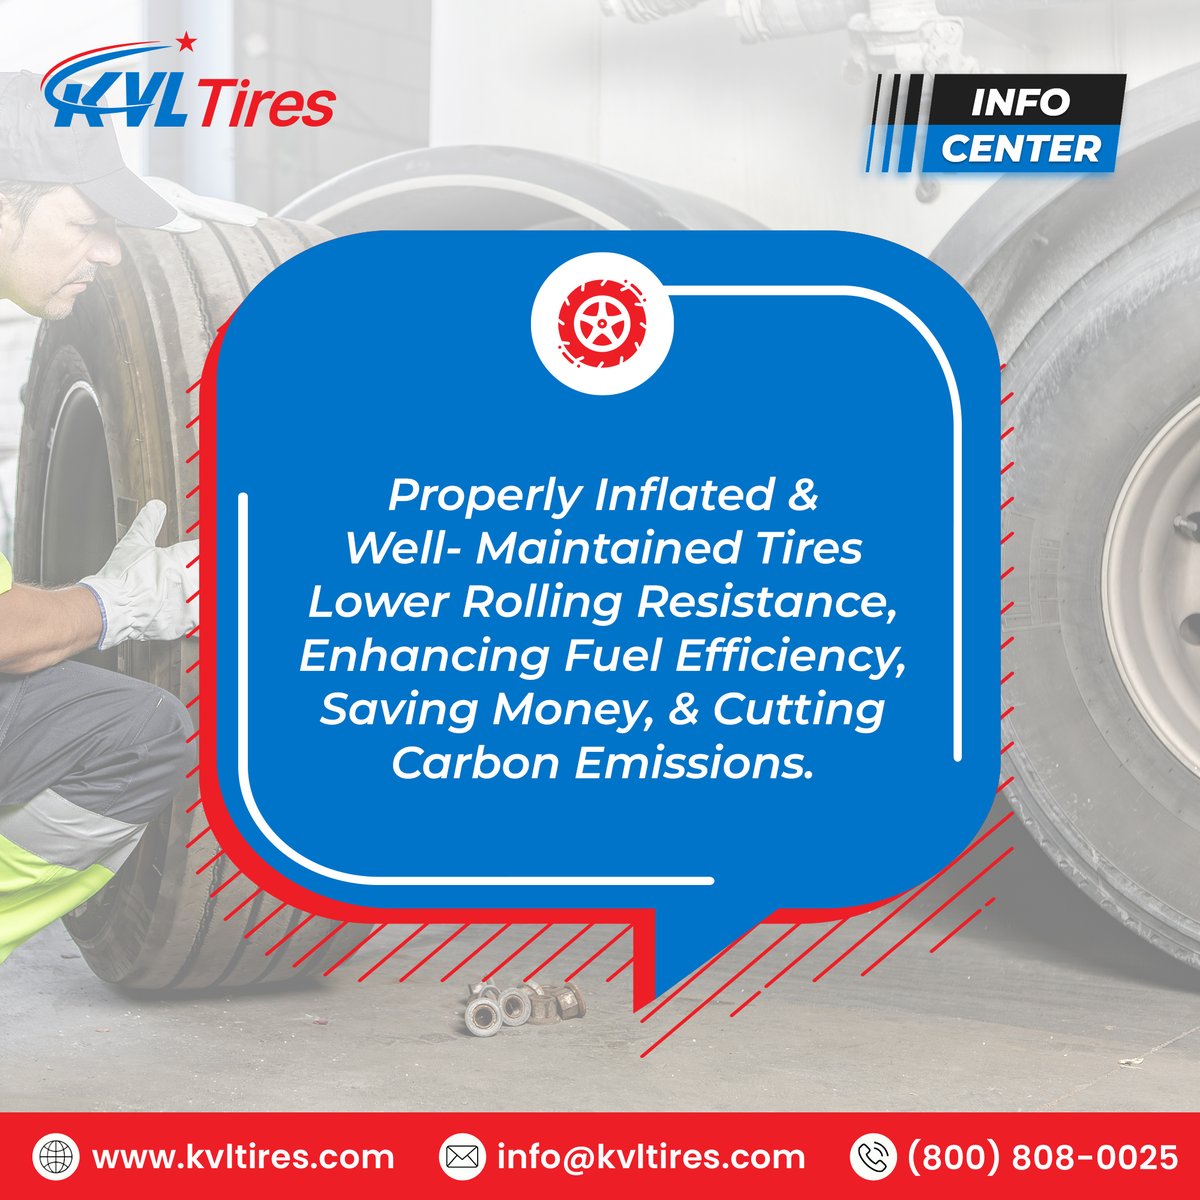 Properly inflated or well-maintained tires not only save you money but also help in reducing emissions. Let's roll towards a greener future!
Stay updated with KVL Tires for all your tires-related knowledge!
#kvltires #updates #tires #tireusa #greenerfuture #savemoney #KNOWLEDGE